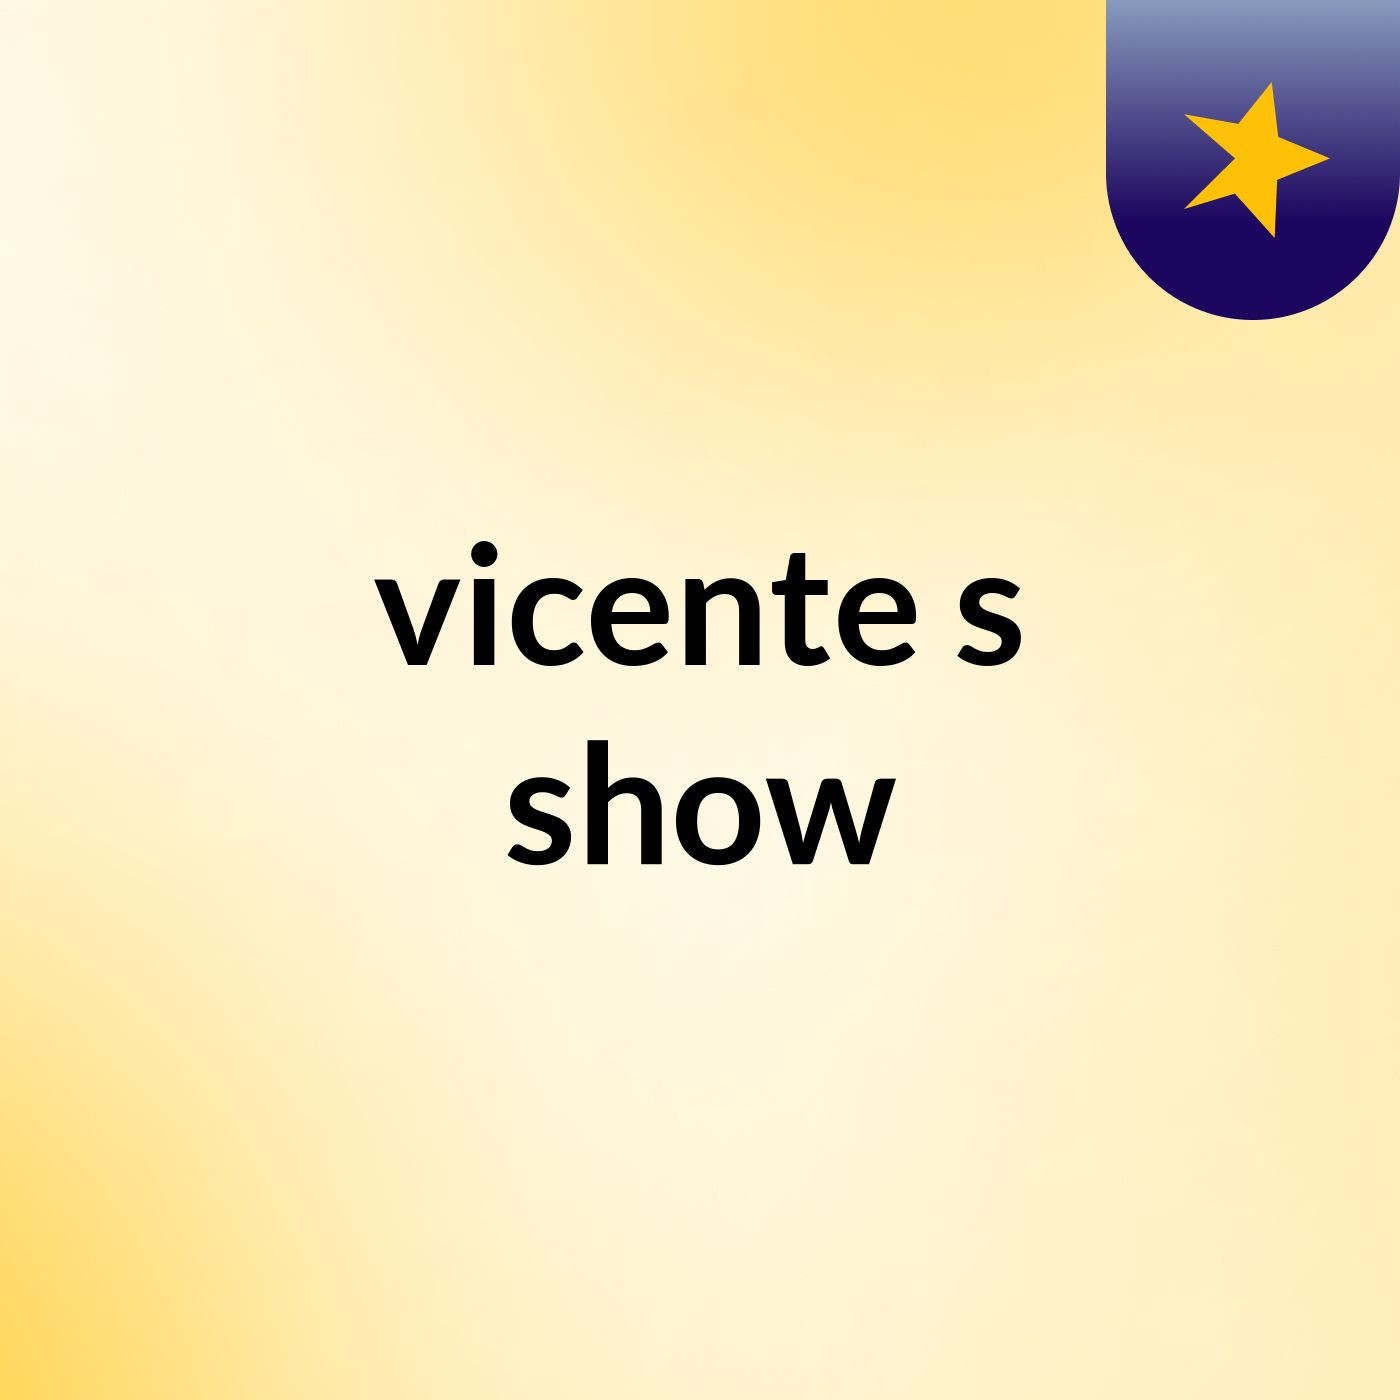 vicente's show